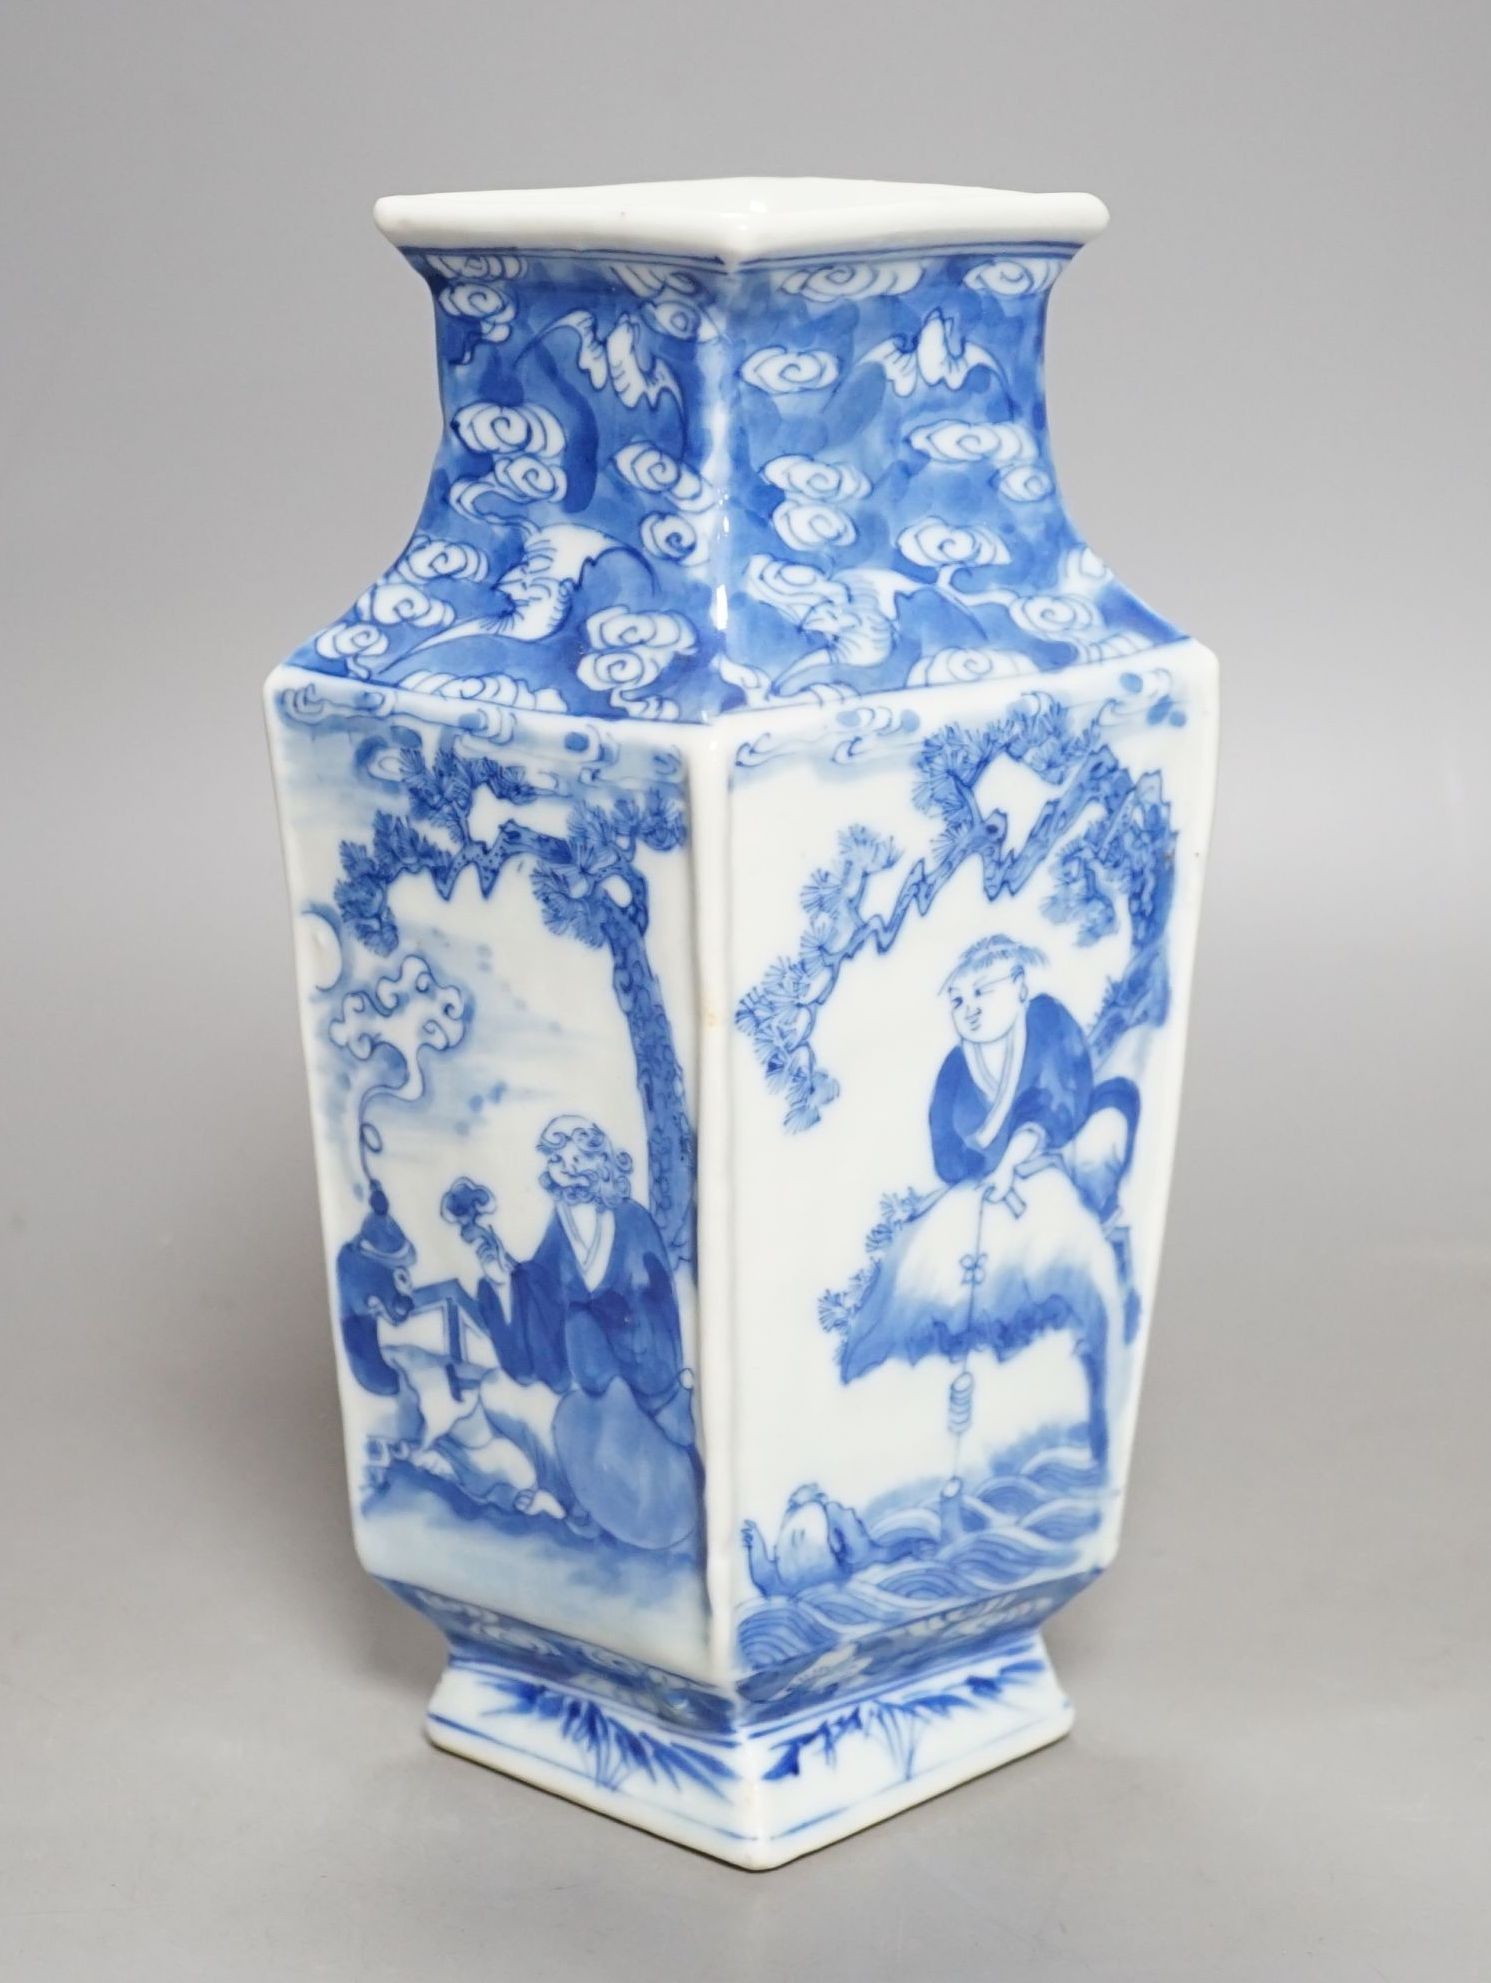 A Chinese blue and white diamond shaped vase, late 18th/ early 19th century vase, 21.5 cms high.